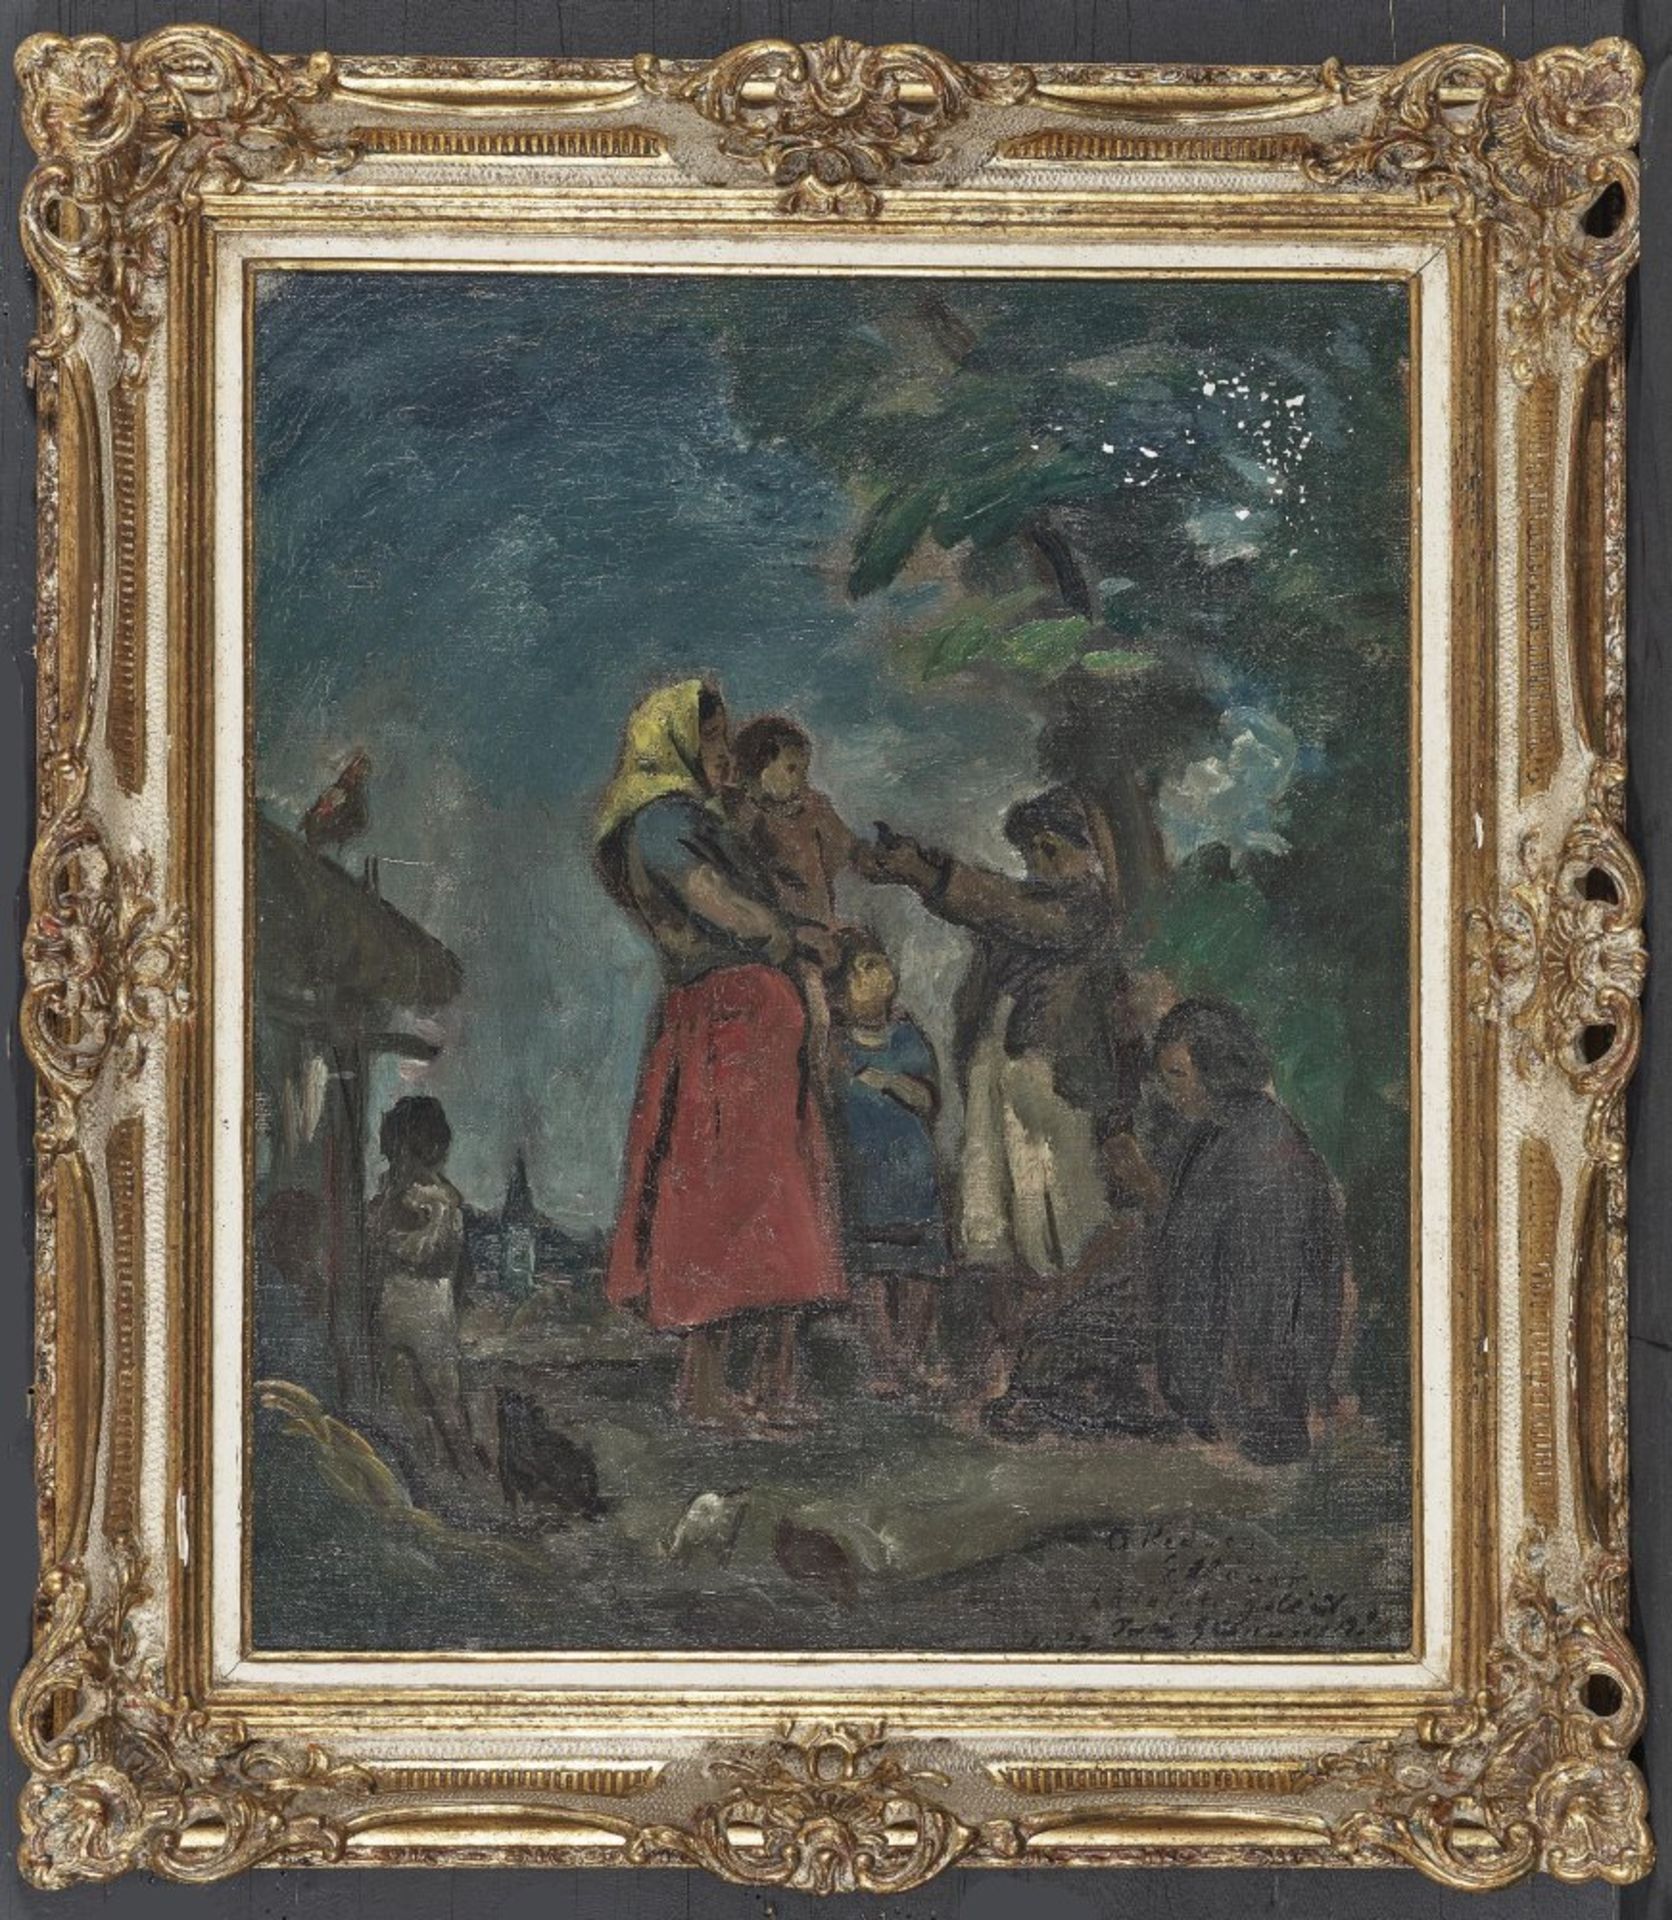 Peasant woman with children in conversation - Image 4 of 4